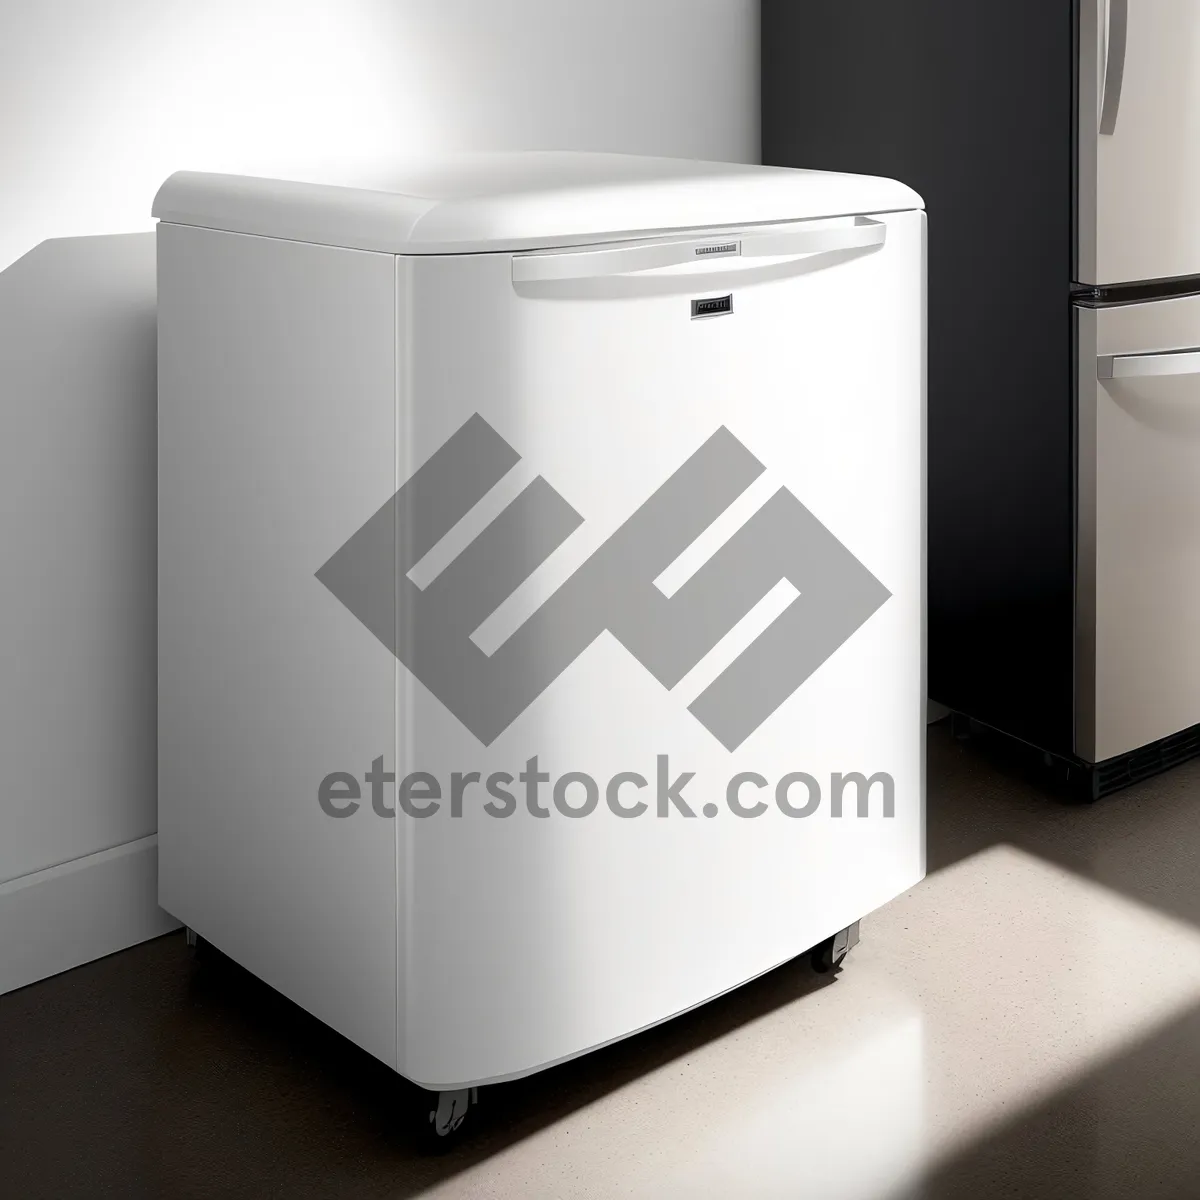 Picture of Empty White Goods Refrigerator: Home Appliance Durable